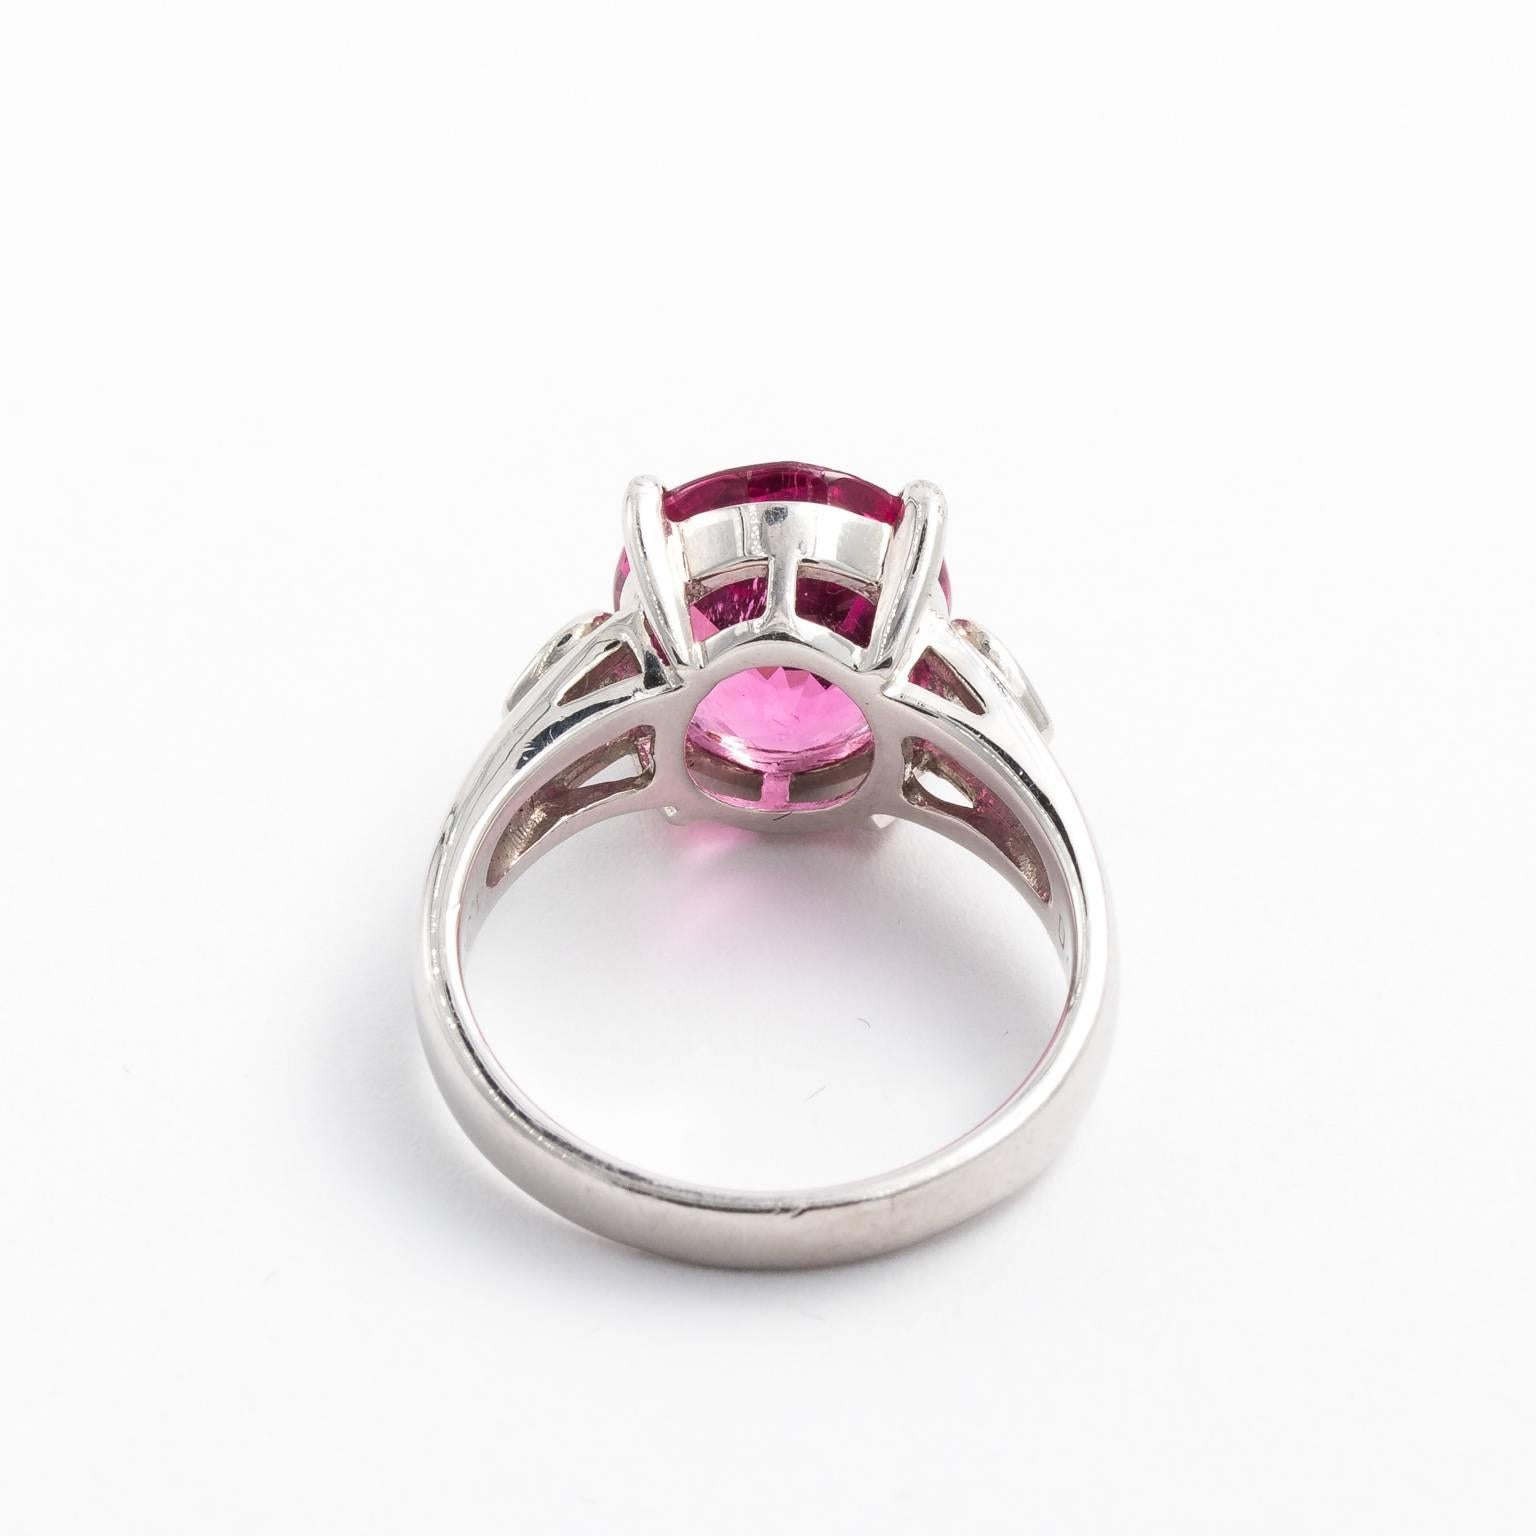 Platinum 4.55 Carat Rubellite Tourmaline Diamond Ring In Excellent Condition For Sale In St.amford, CT